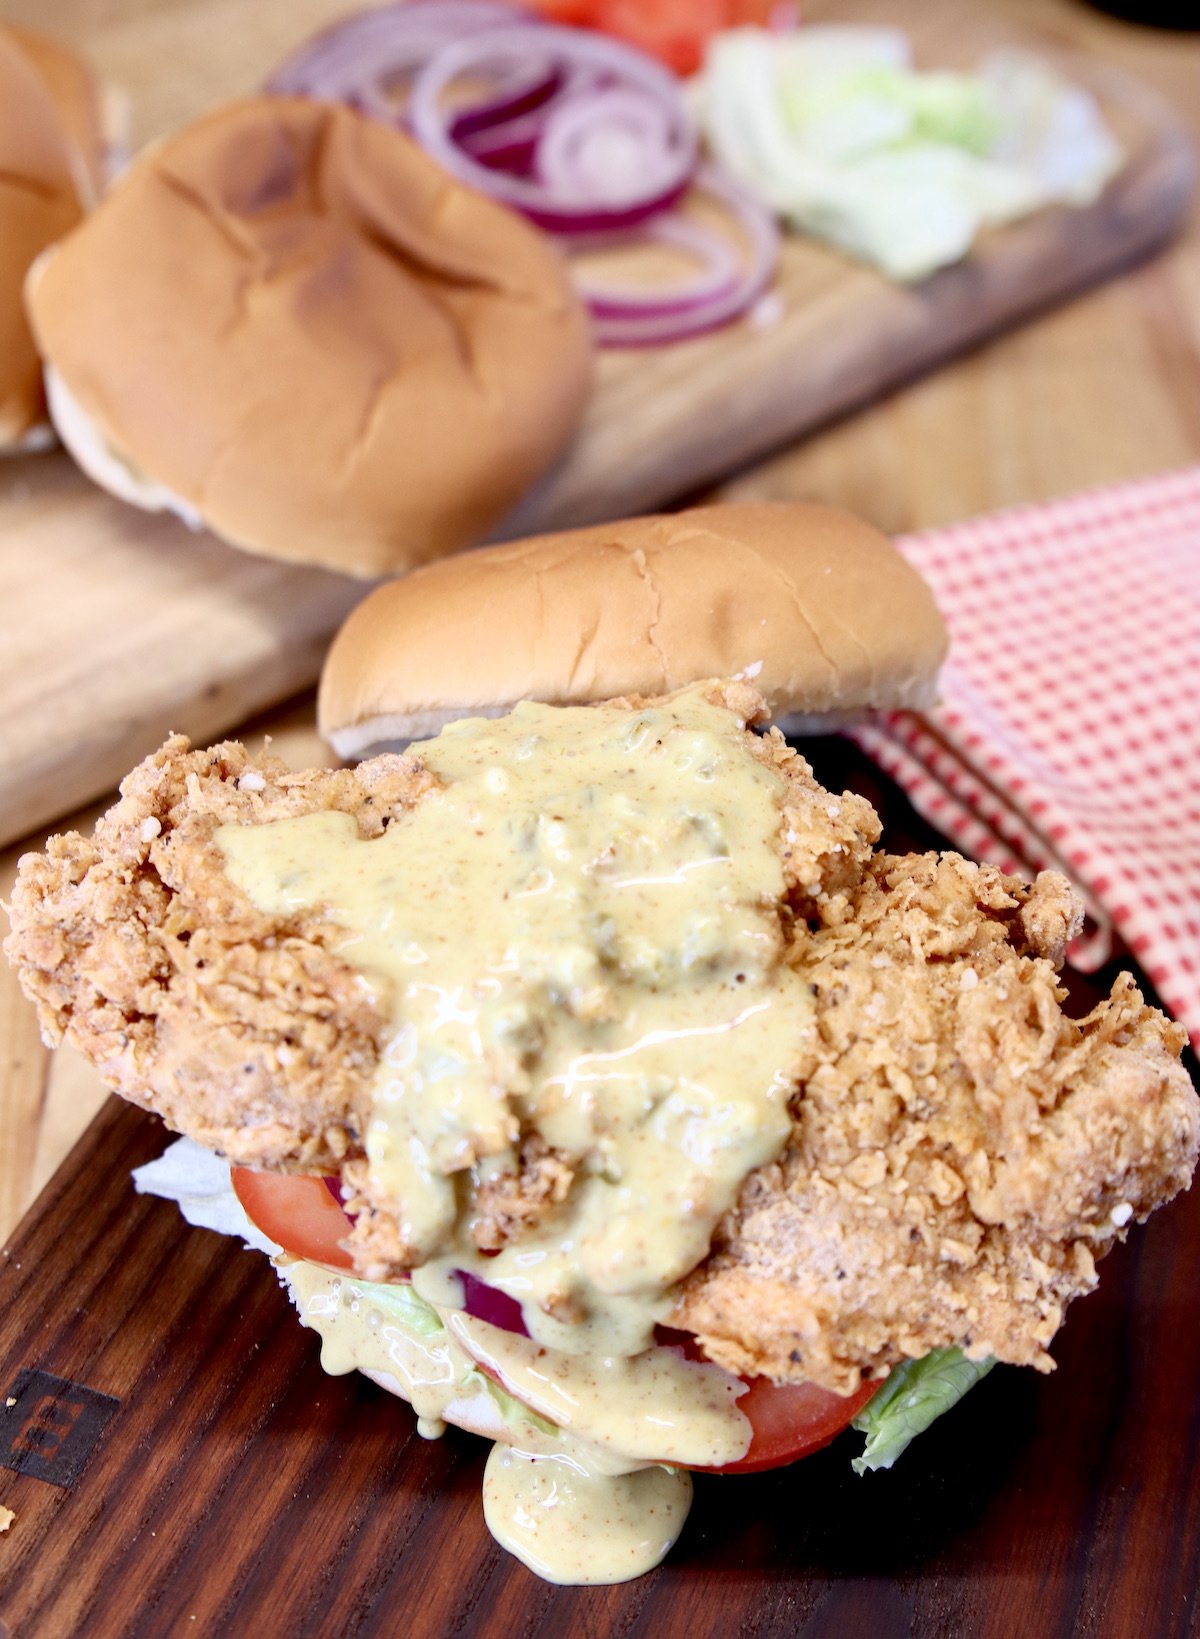 fried chicken sandwich with jalapeno honey mustard drizzled over